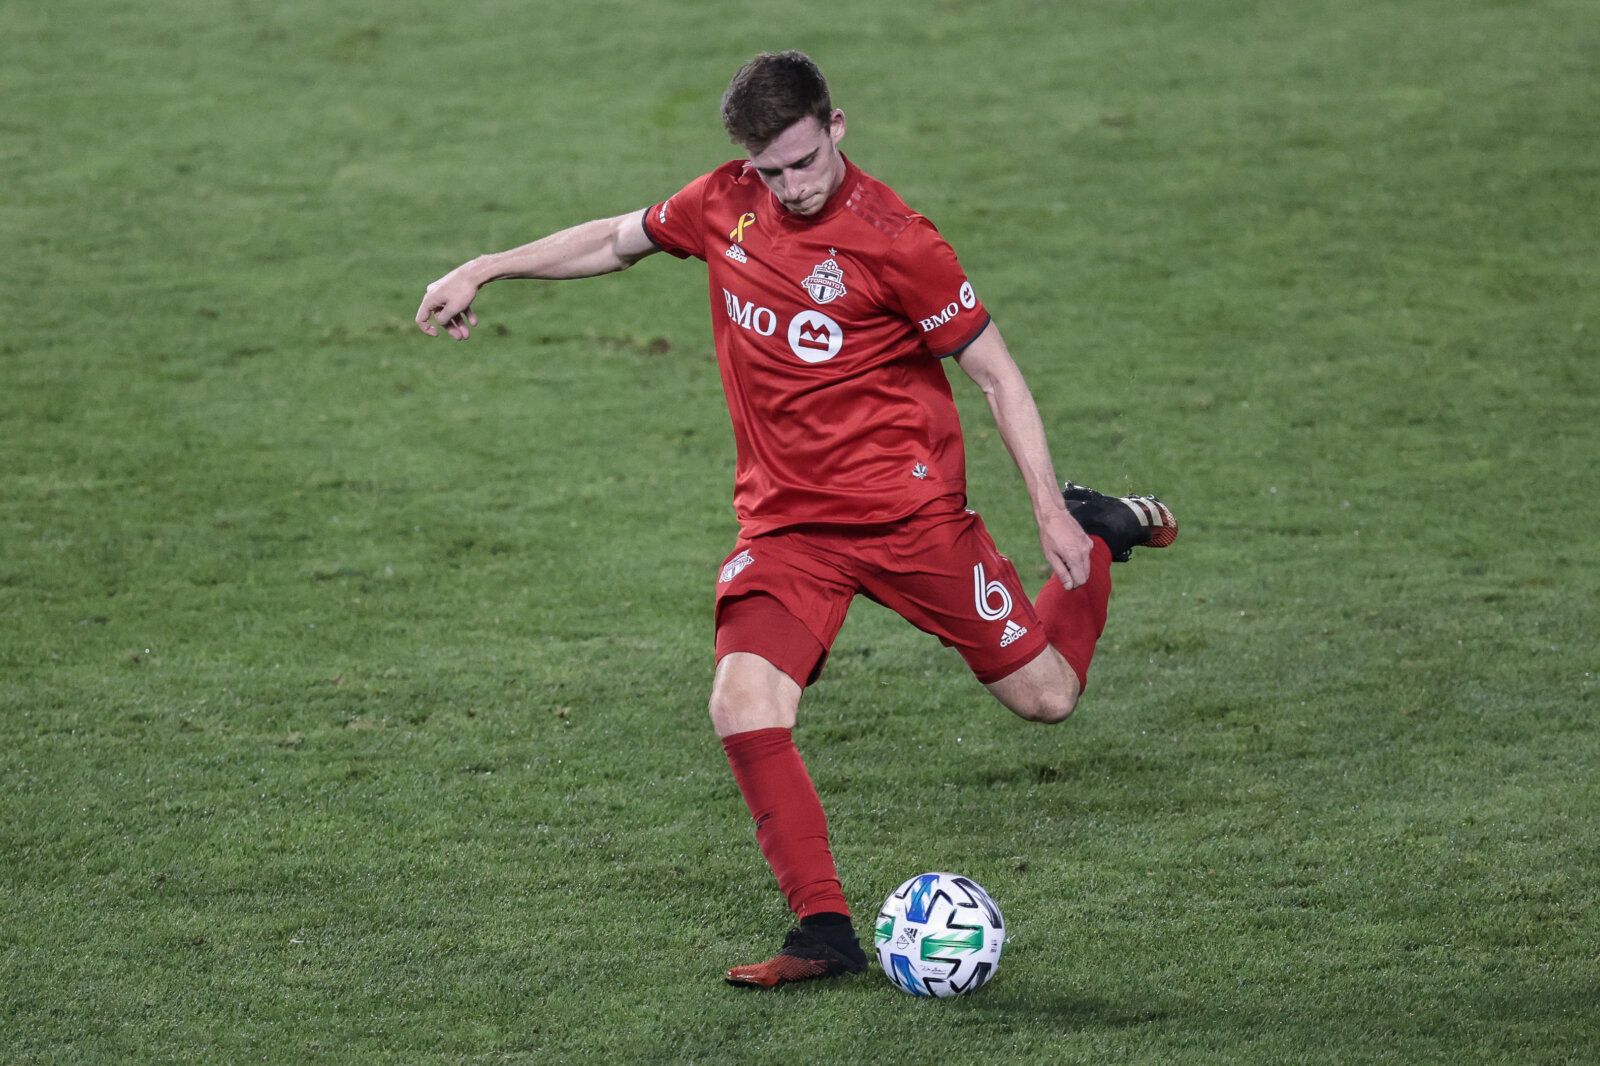 Sep 23, 2020; Harrison, New Jersey, USA; Toronto FC defender Tony Gallacher (6) kicks the ball during the first half against New York City FC at Red Bull Arena. Mandatory Credit: Vincent Carchietta-USA TODAY Sports